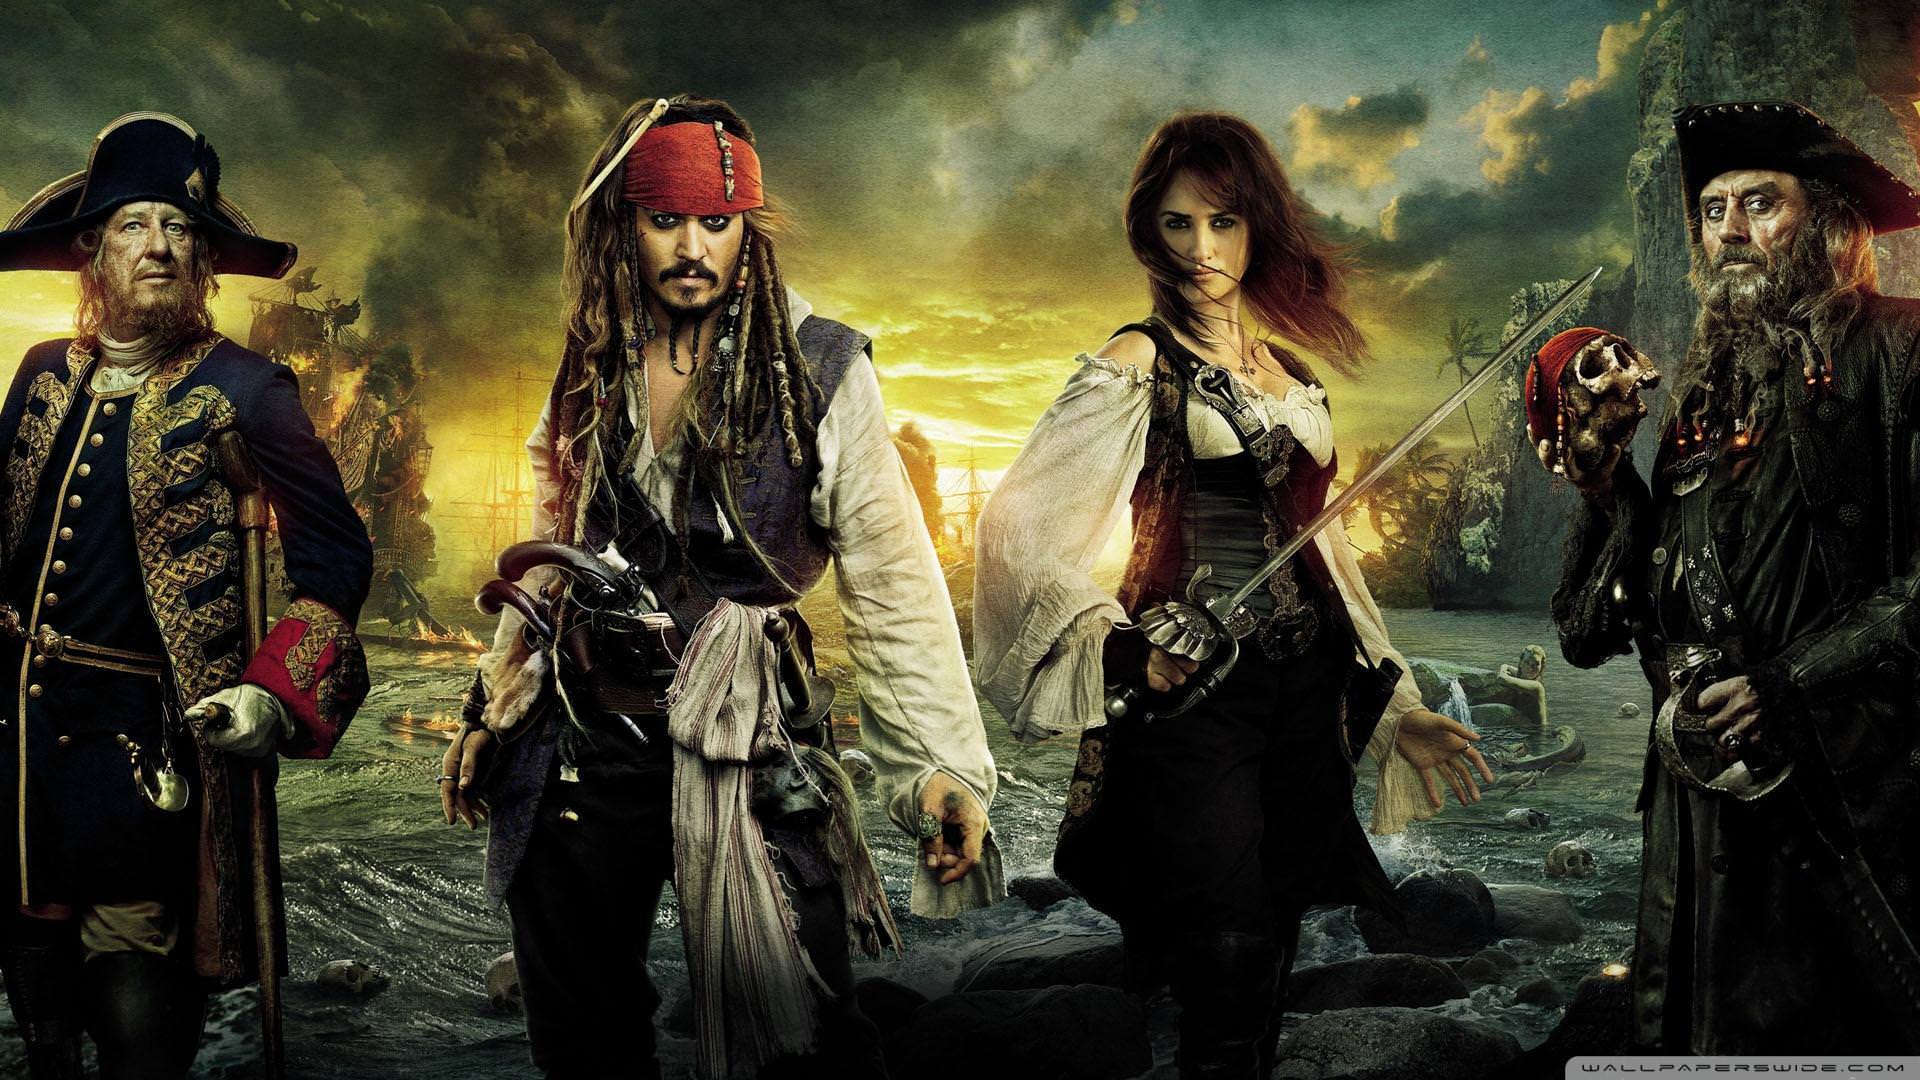 Download Pirates Of The Caribbean Full HD FHD 1080p Desktop Backgrounds For  PC Mac Wallpaper 